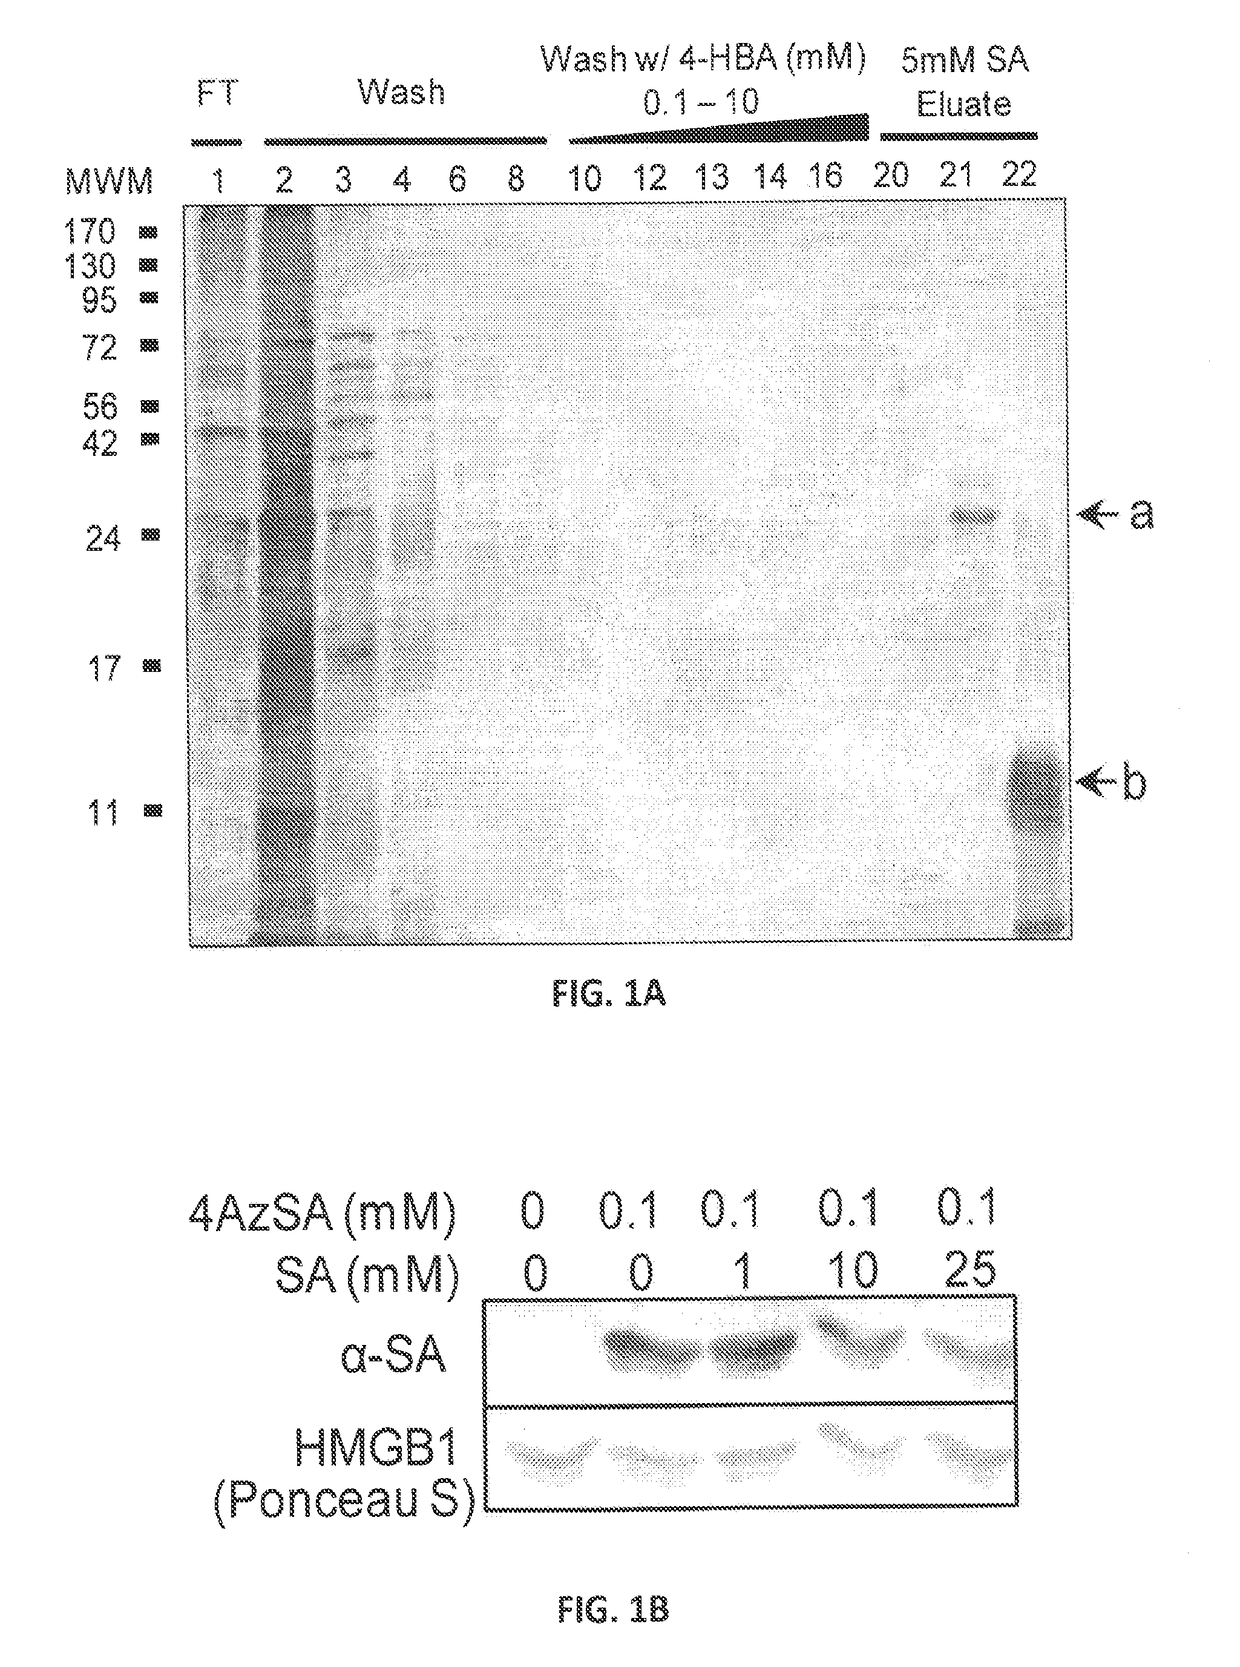 Structure and function of the salicyclic acid binding sites on human hmgb1 and methods of use thereof for the rational design of both salicyclic acid derivatives and other agents that alter animal and plant hmgbs activities